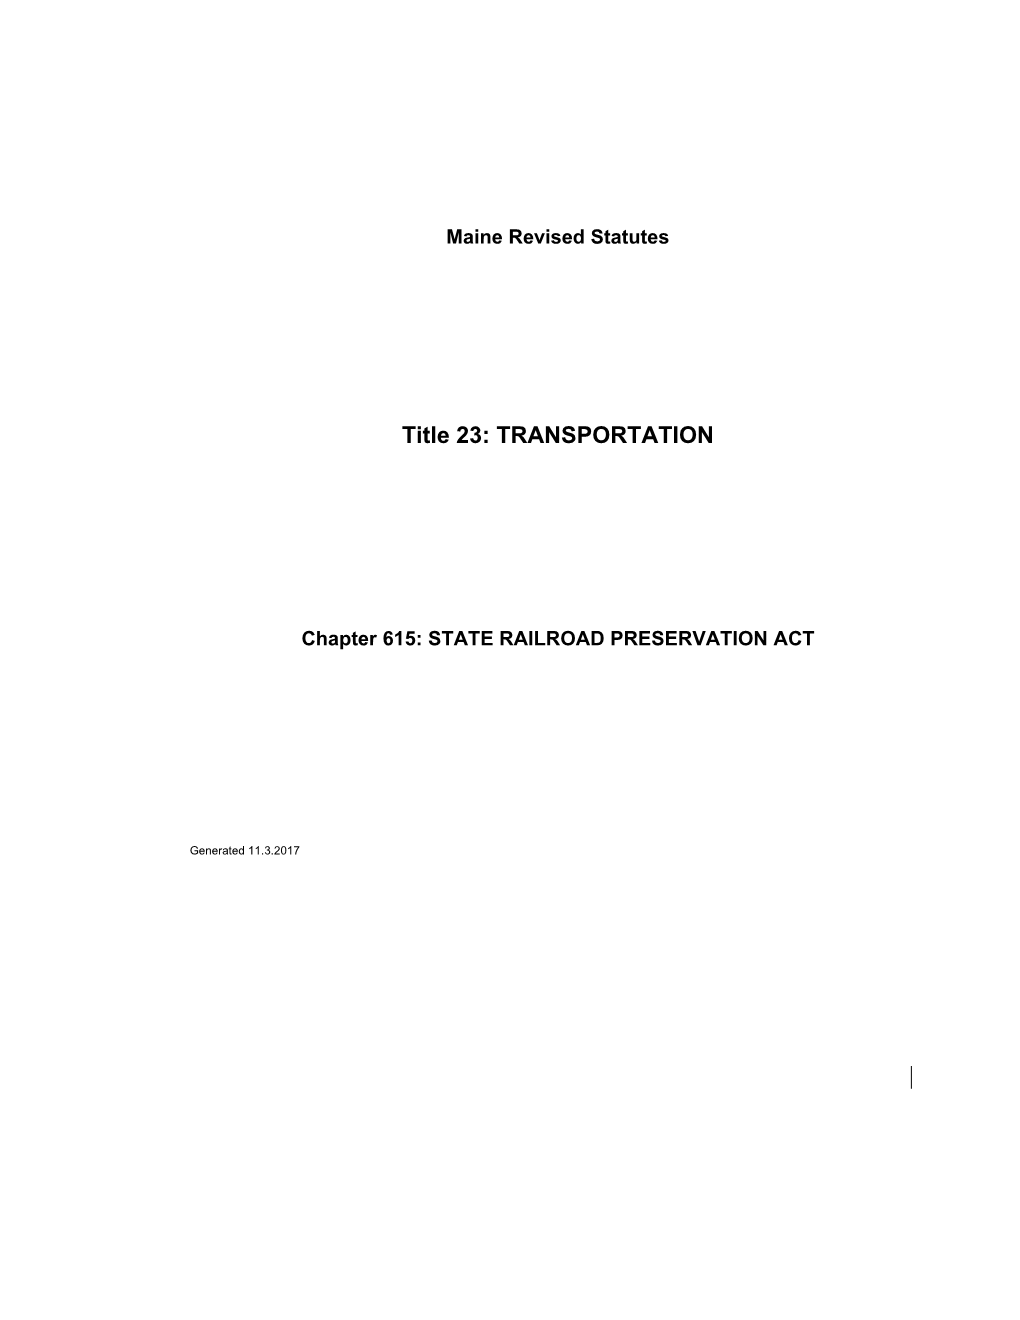 MRS Title 23 7106. RAILROADS; ACQUISITION of RAILROAD OPERATING EQUIPMENT by the DEPARTMENT